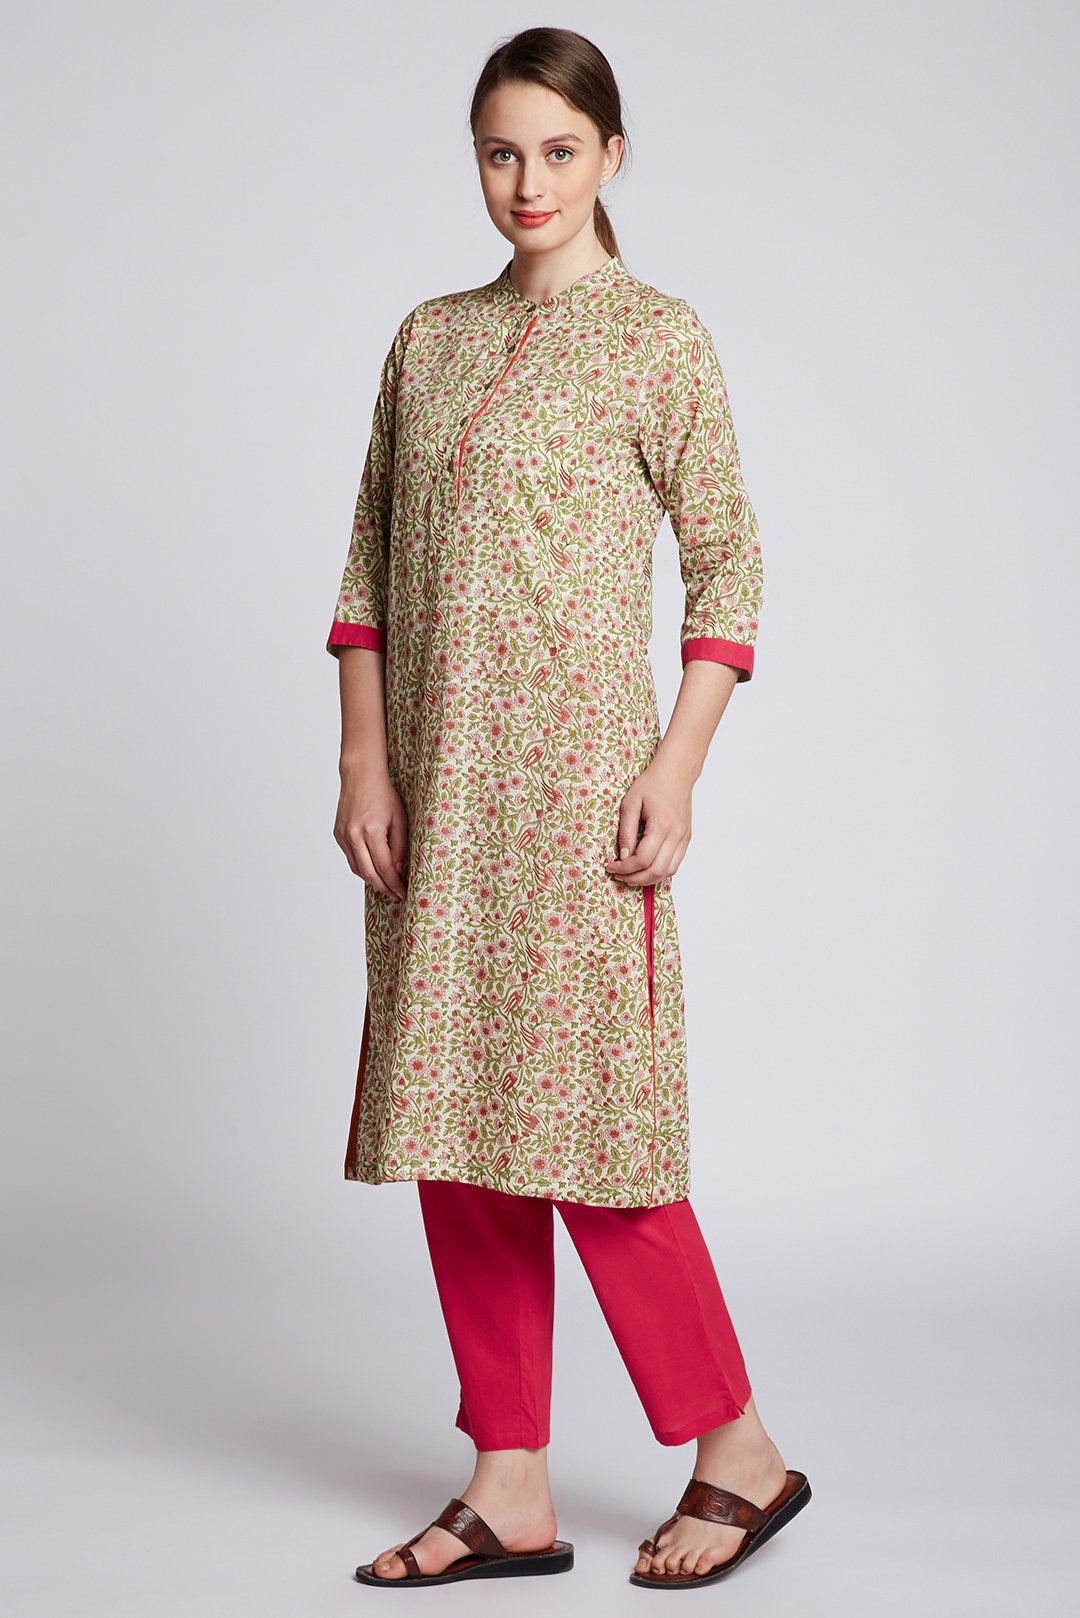 Ladies Yellow Straight Long Kurti With Pant And Dupatta, Size: S, M, L, XL  at Rs 650/piece in Jaipur